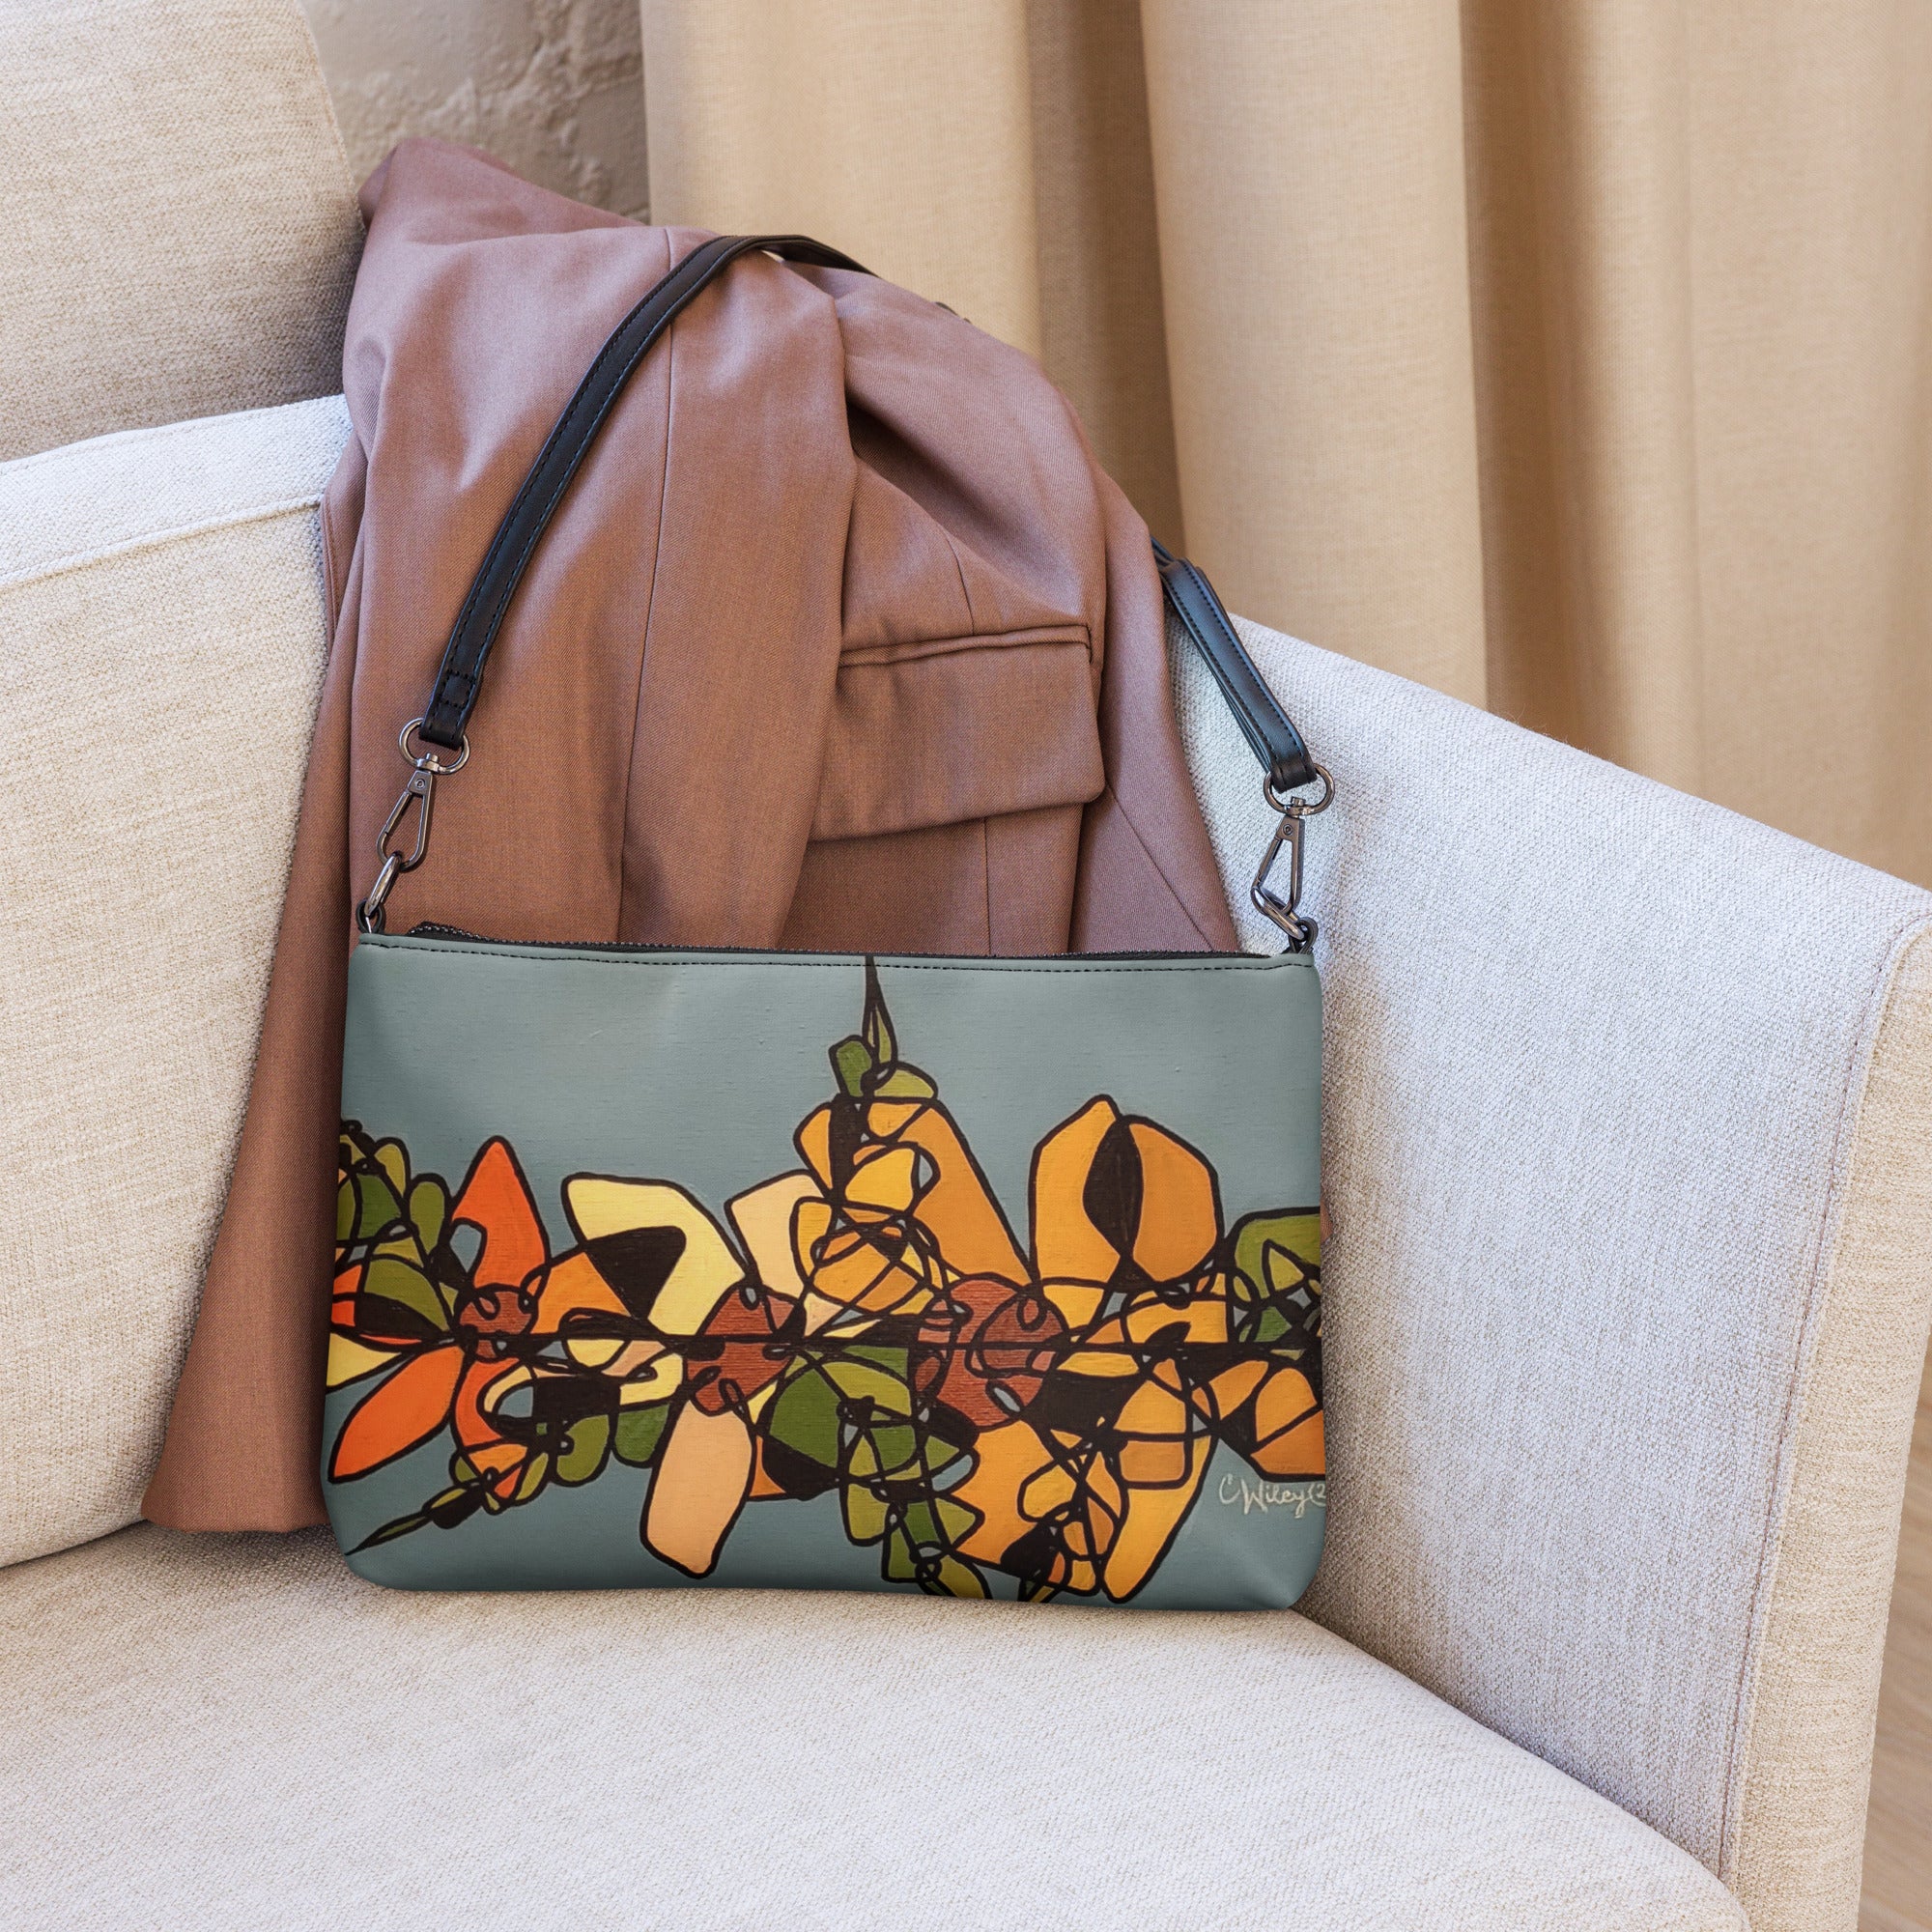 A purse with a black strap in blue with abstract orange and black flowers